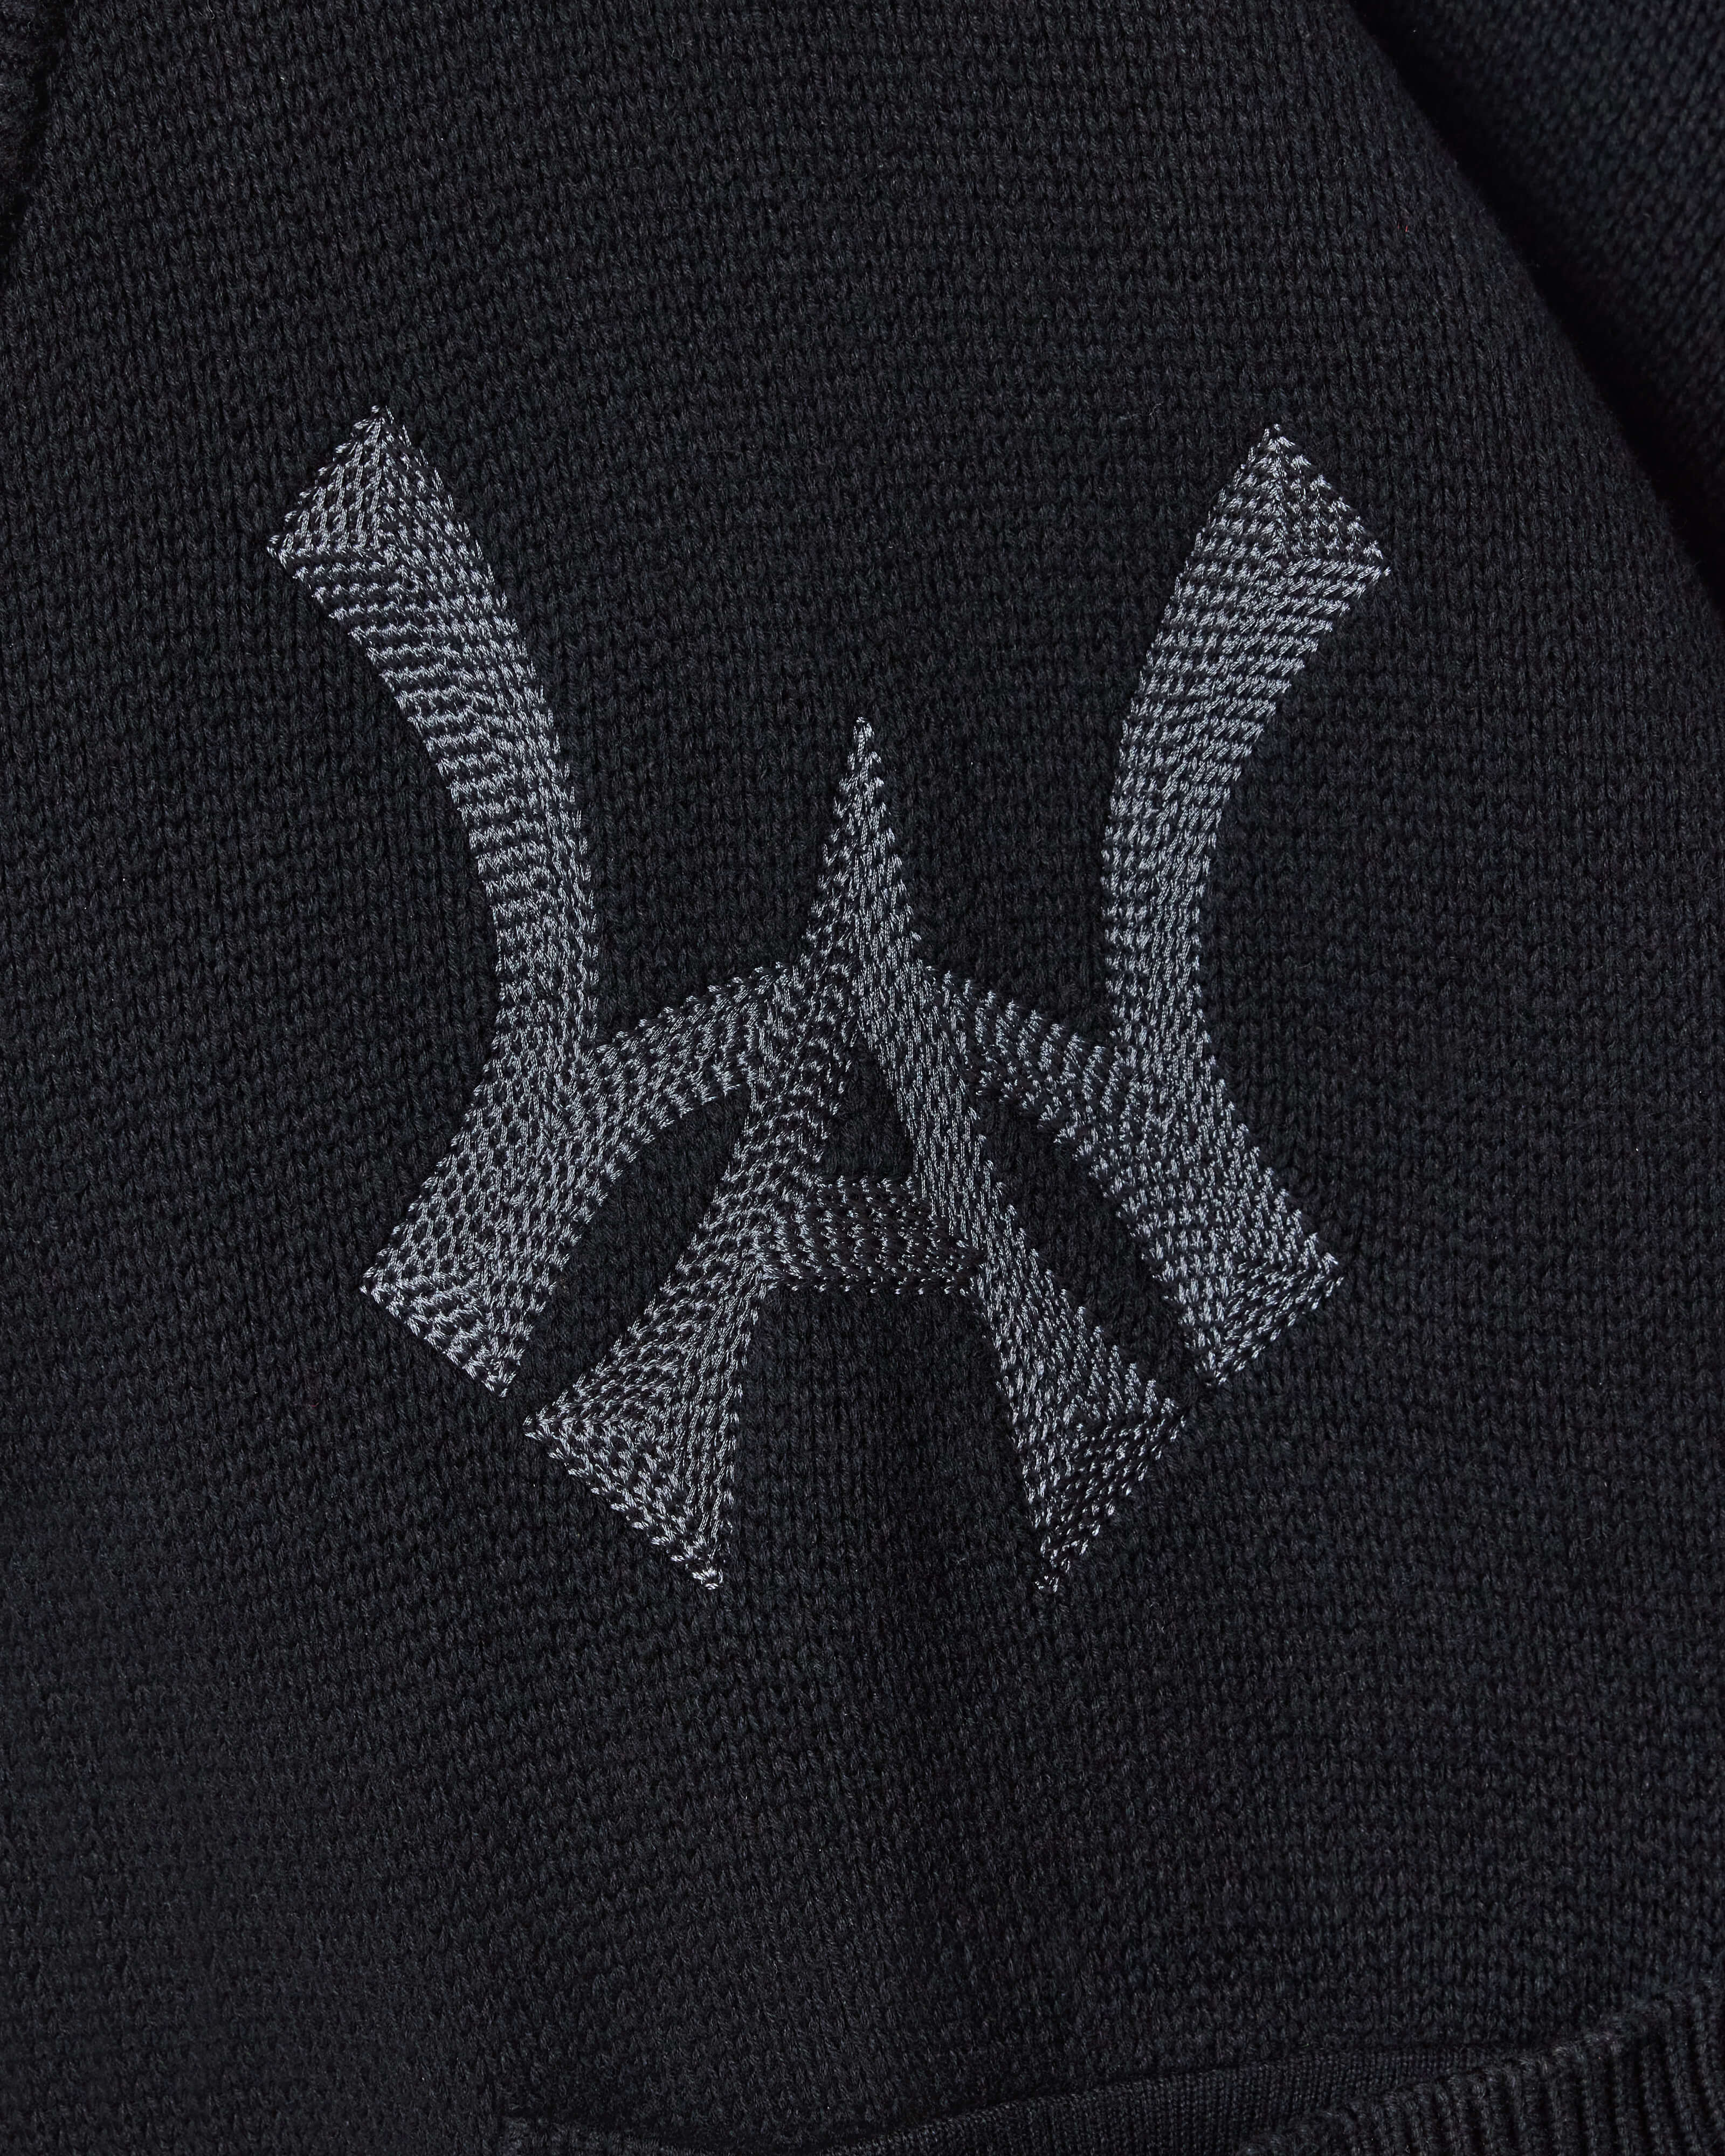 Closer look at the brand logo in a monogram font of connecting the "W" and "A" located on the upper left chest of the cardigan.